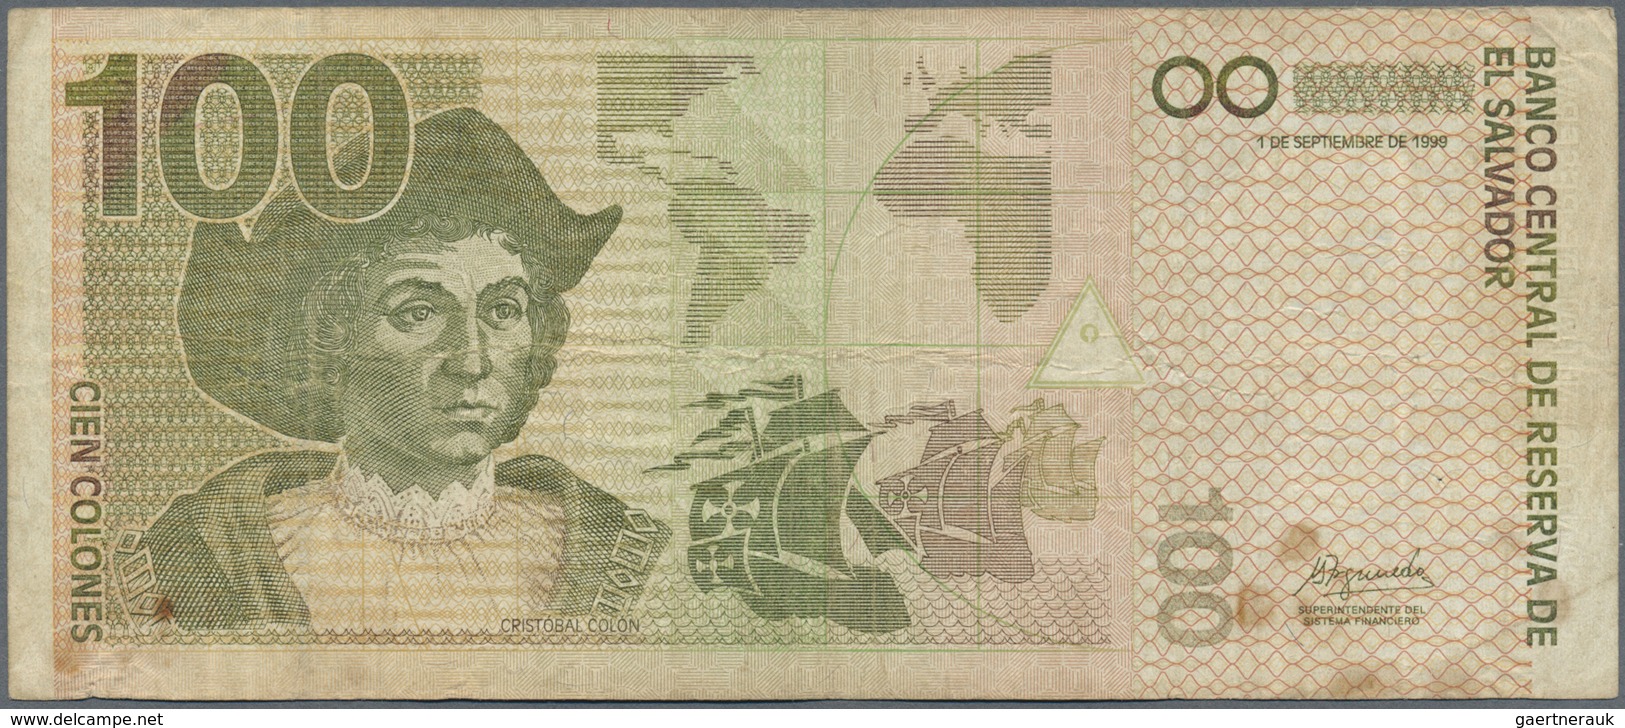 El Salvador: Set Of 2 Notes 100 Colones 1999 P. 157, Both Used With Folds And Creases, One With Stai - El Salvador